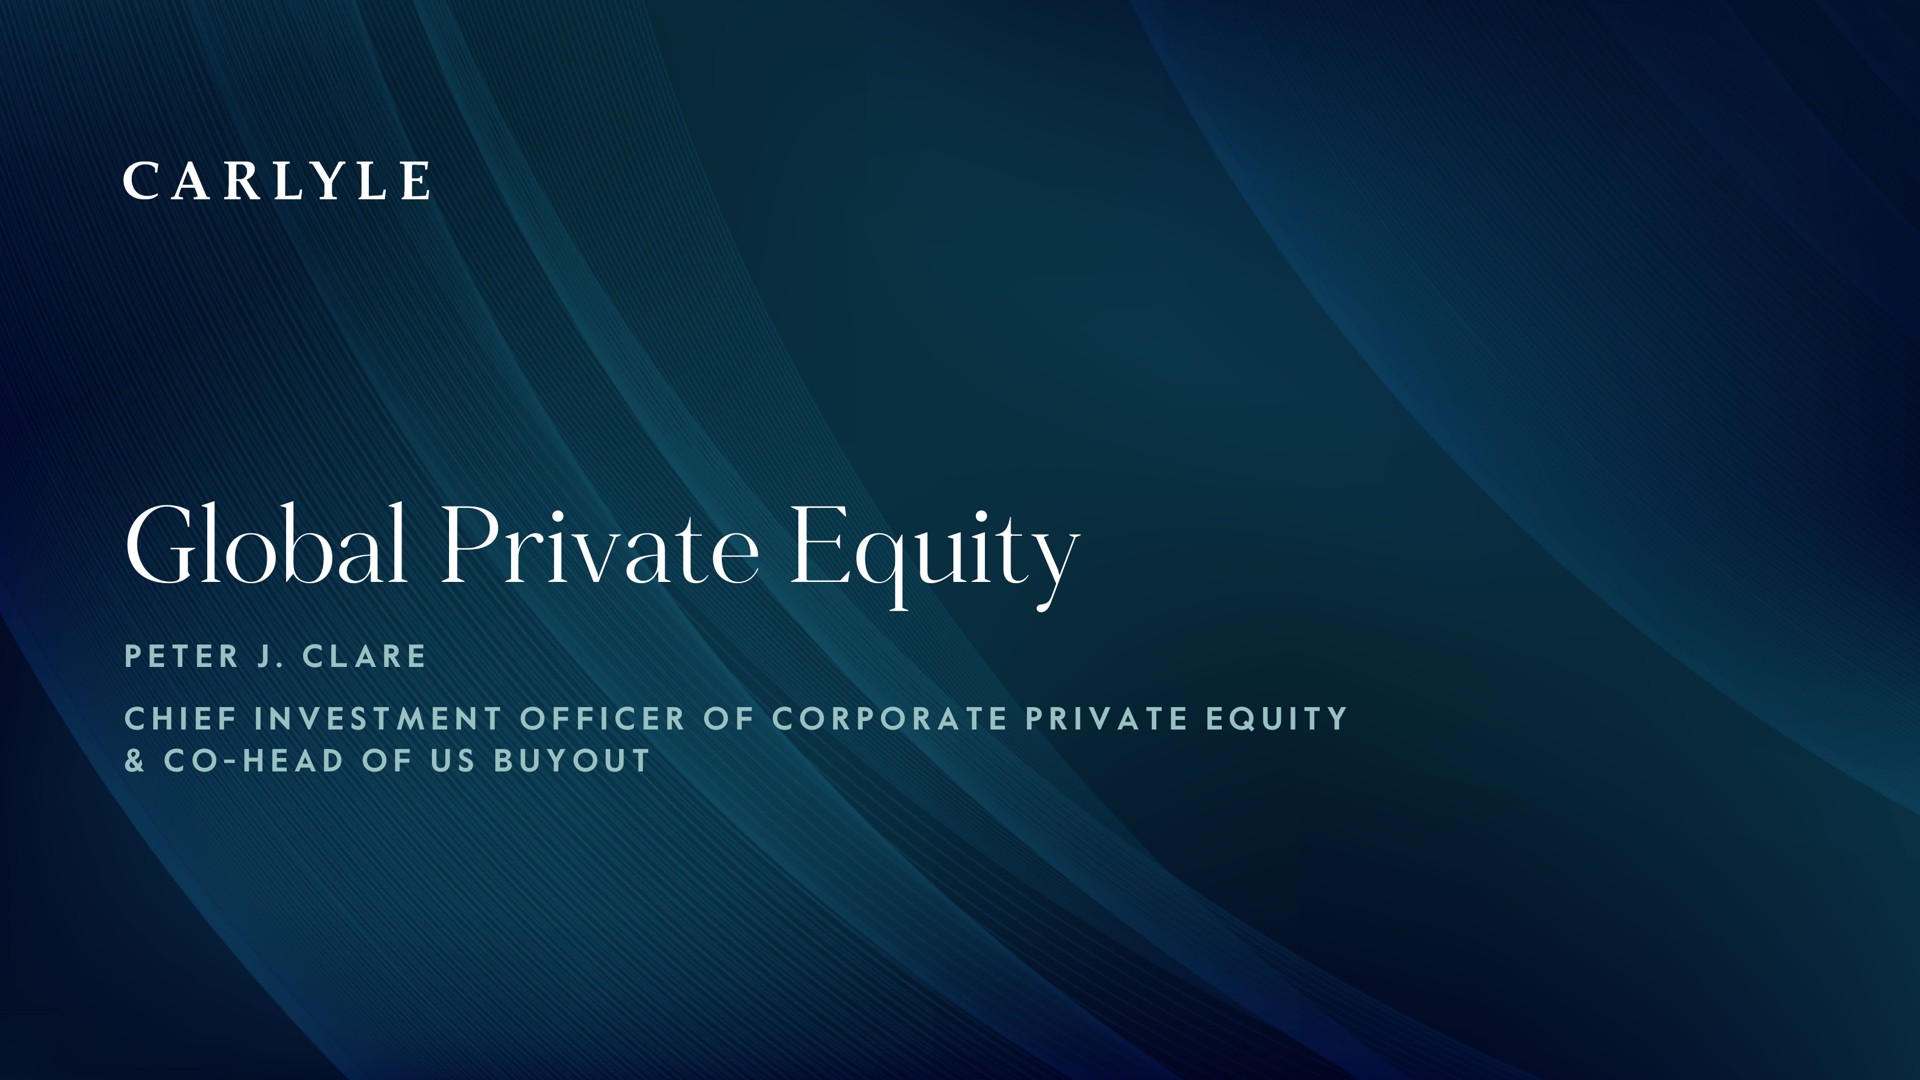 global private equity | Carlyle